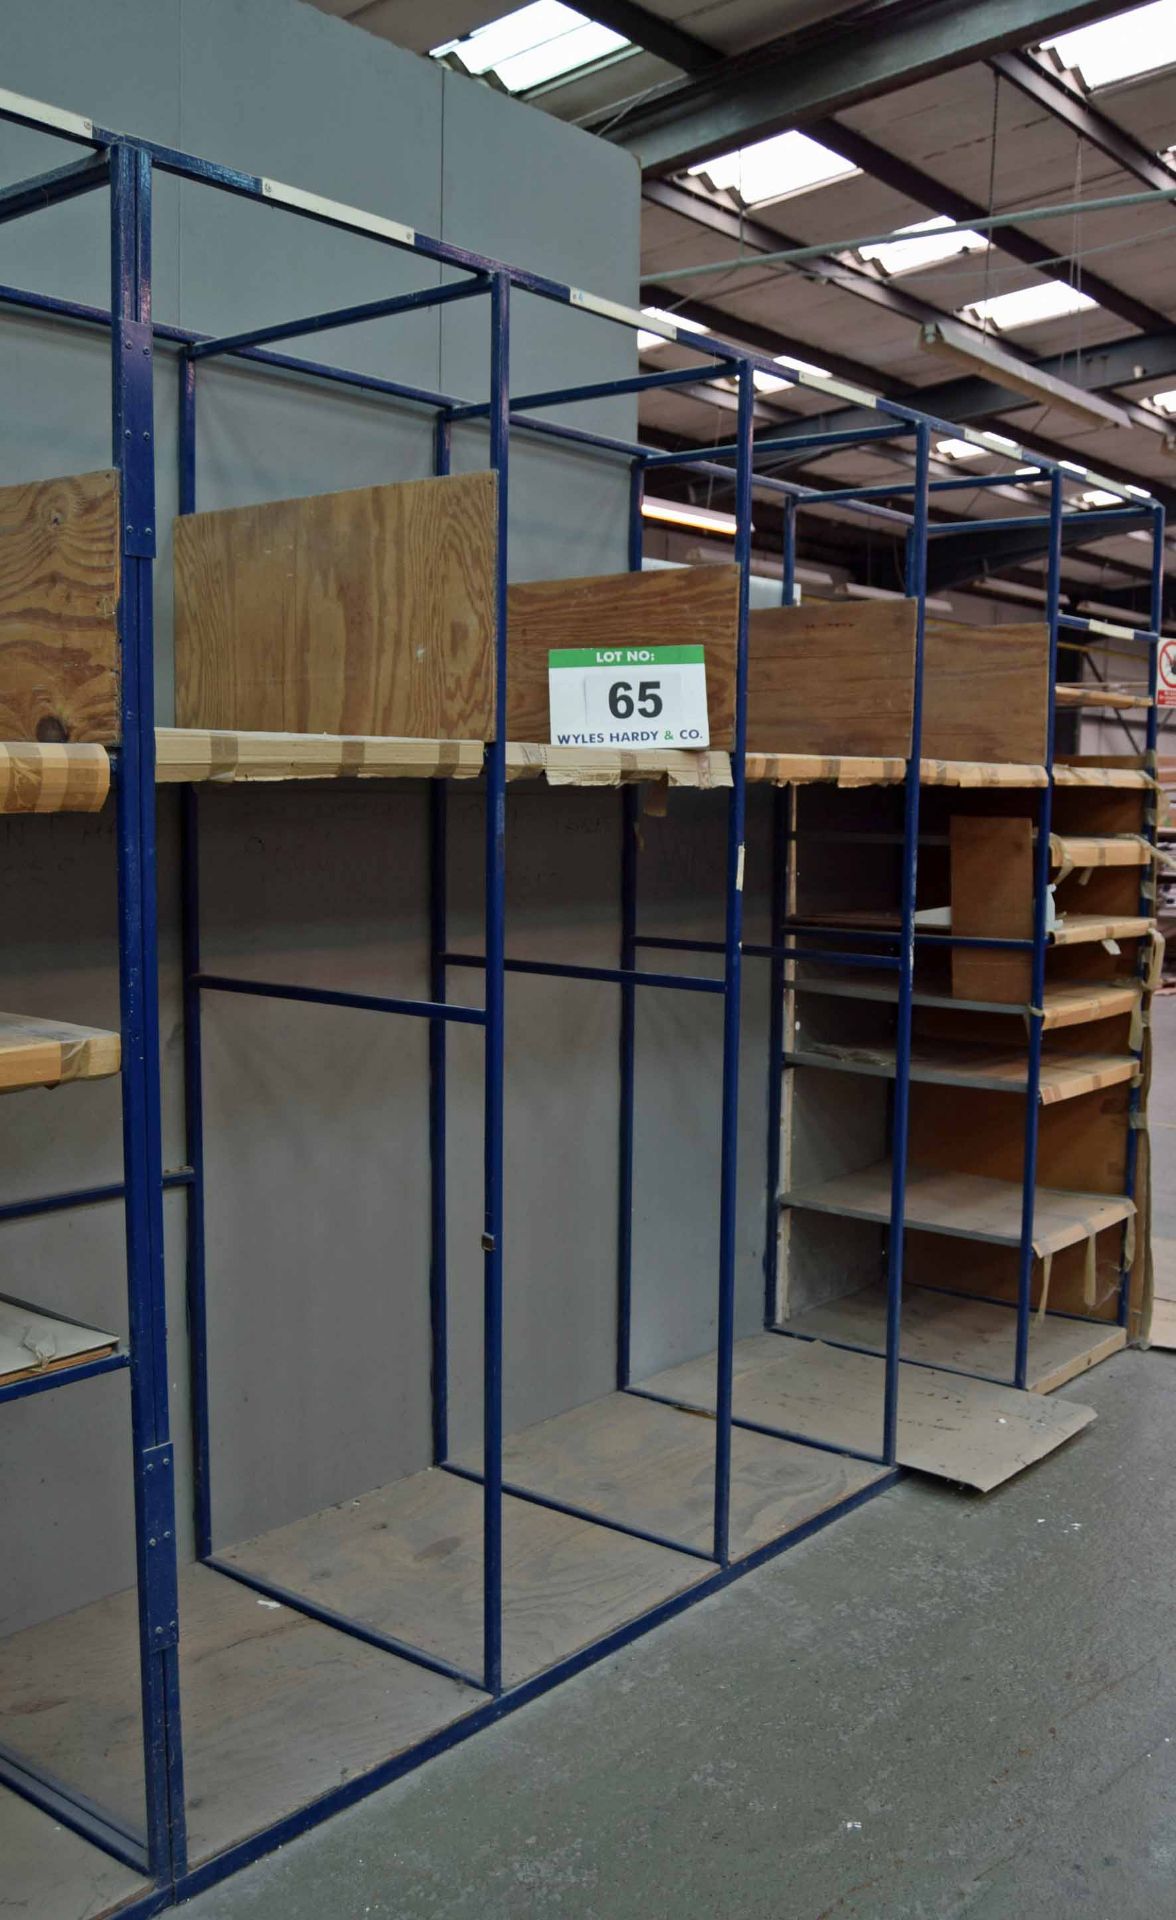 A 3.5M x 2.5M x 0.8M Welded Steel Parts/Stock Rack (As Photographed)